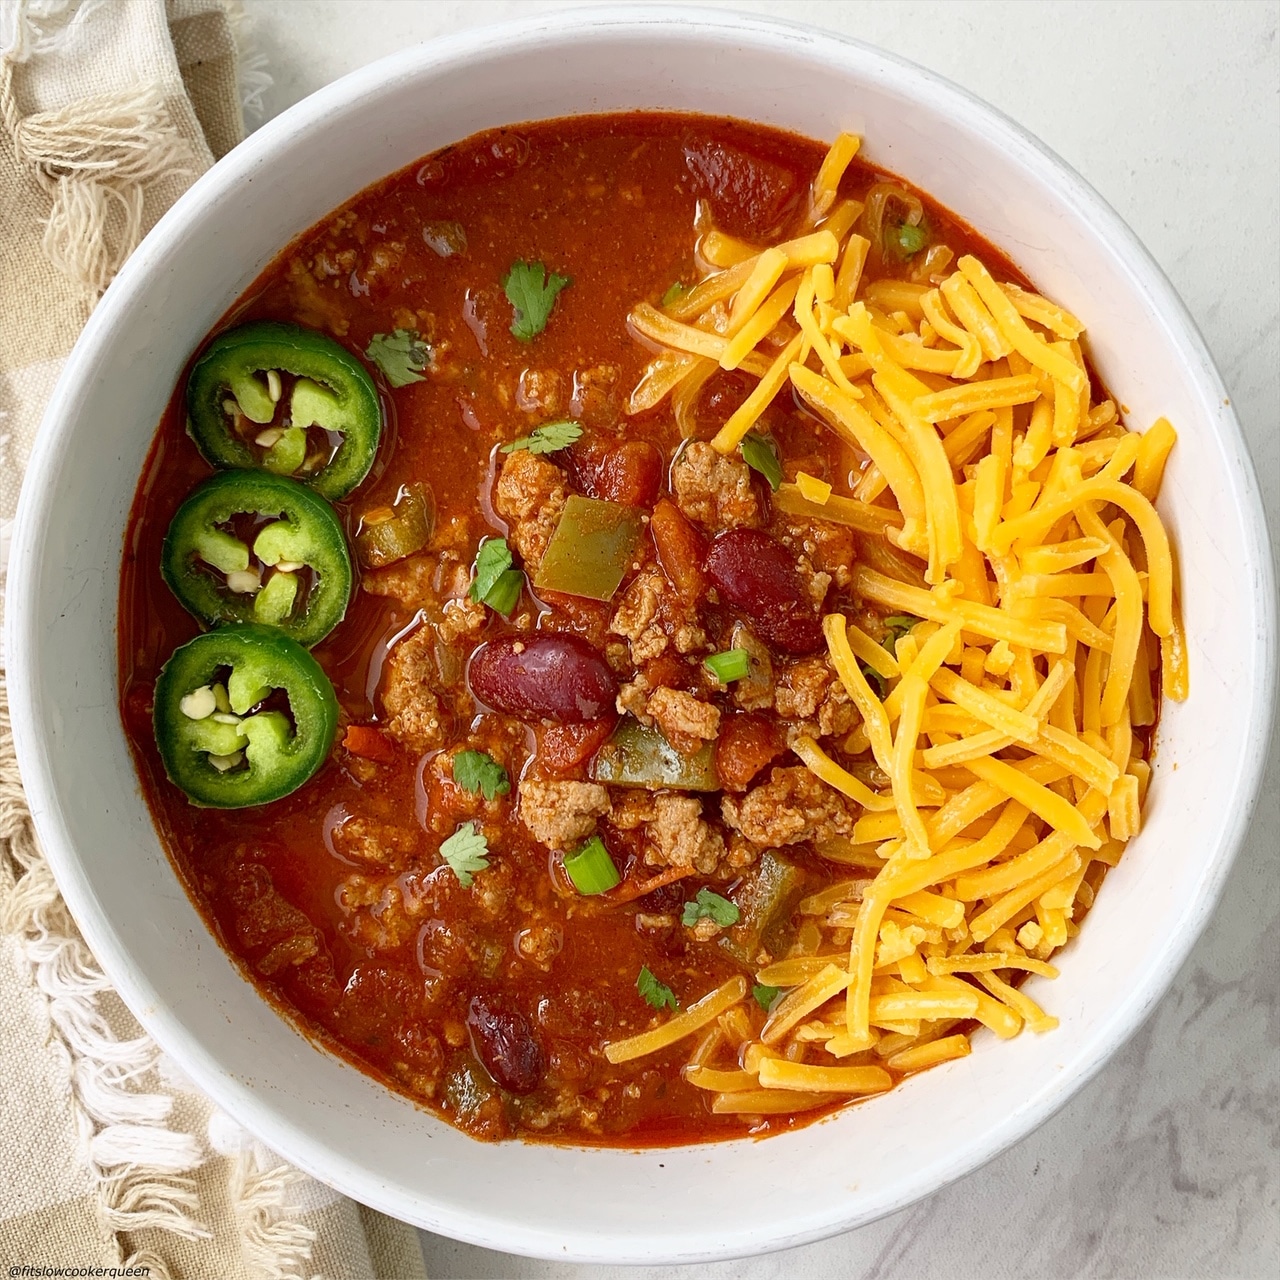 The Best Slow Cooker or Instant Pot Turkey Chili from Fit Slow Cooker Queen